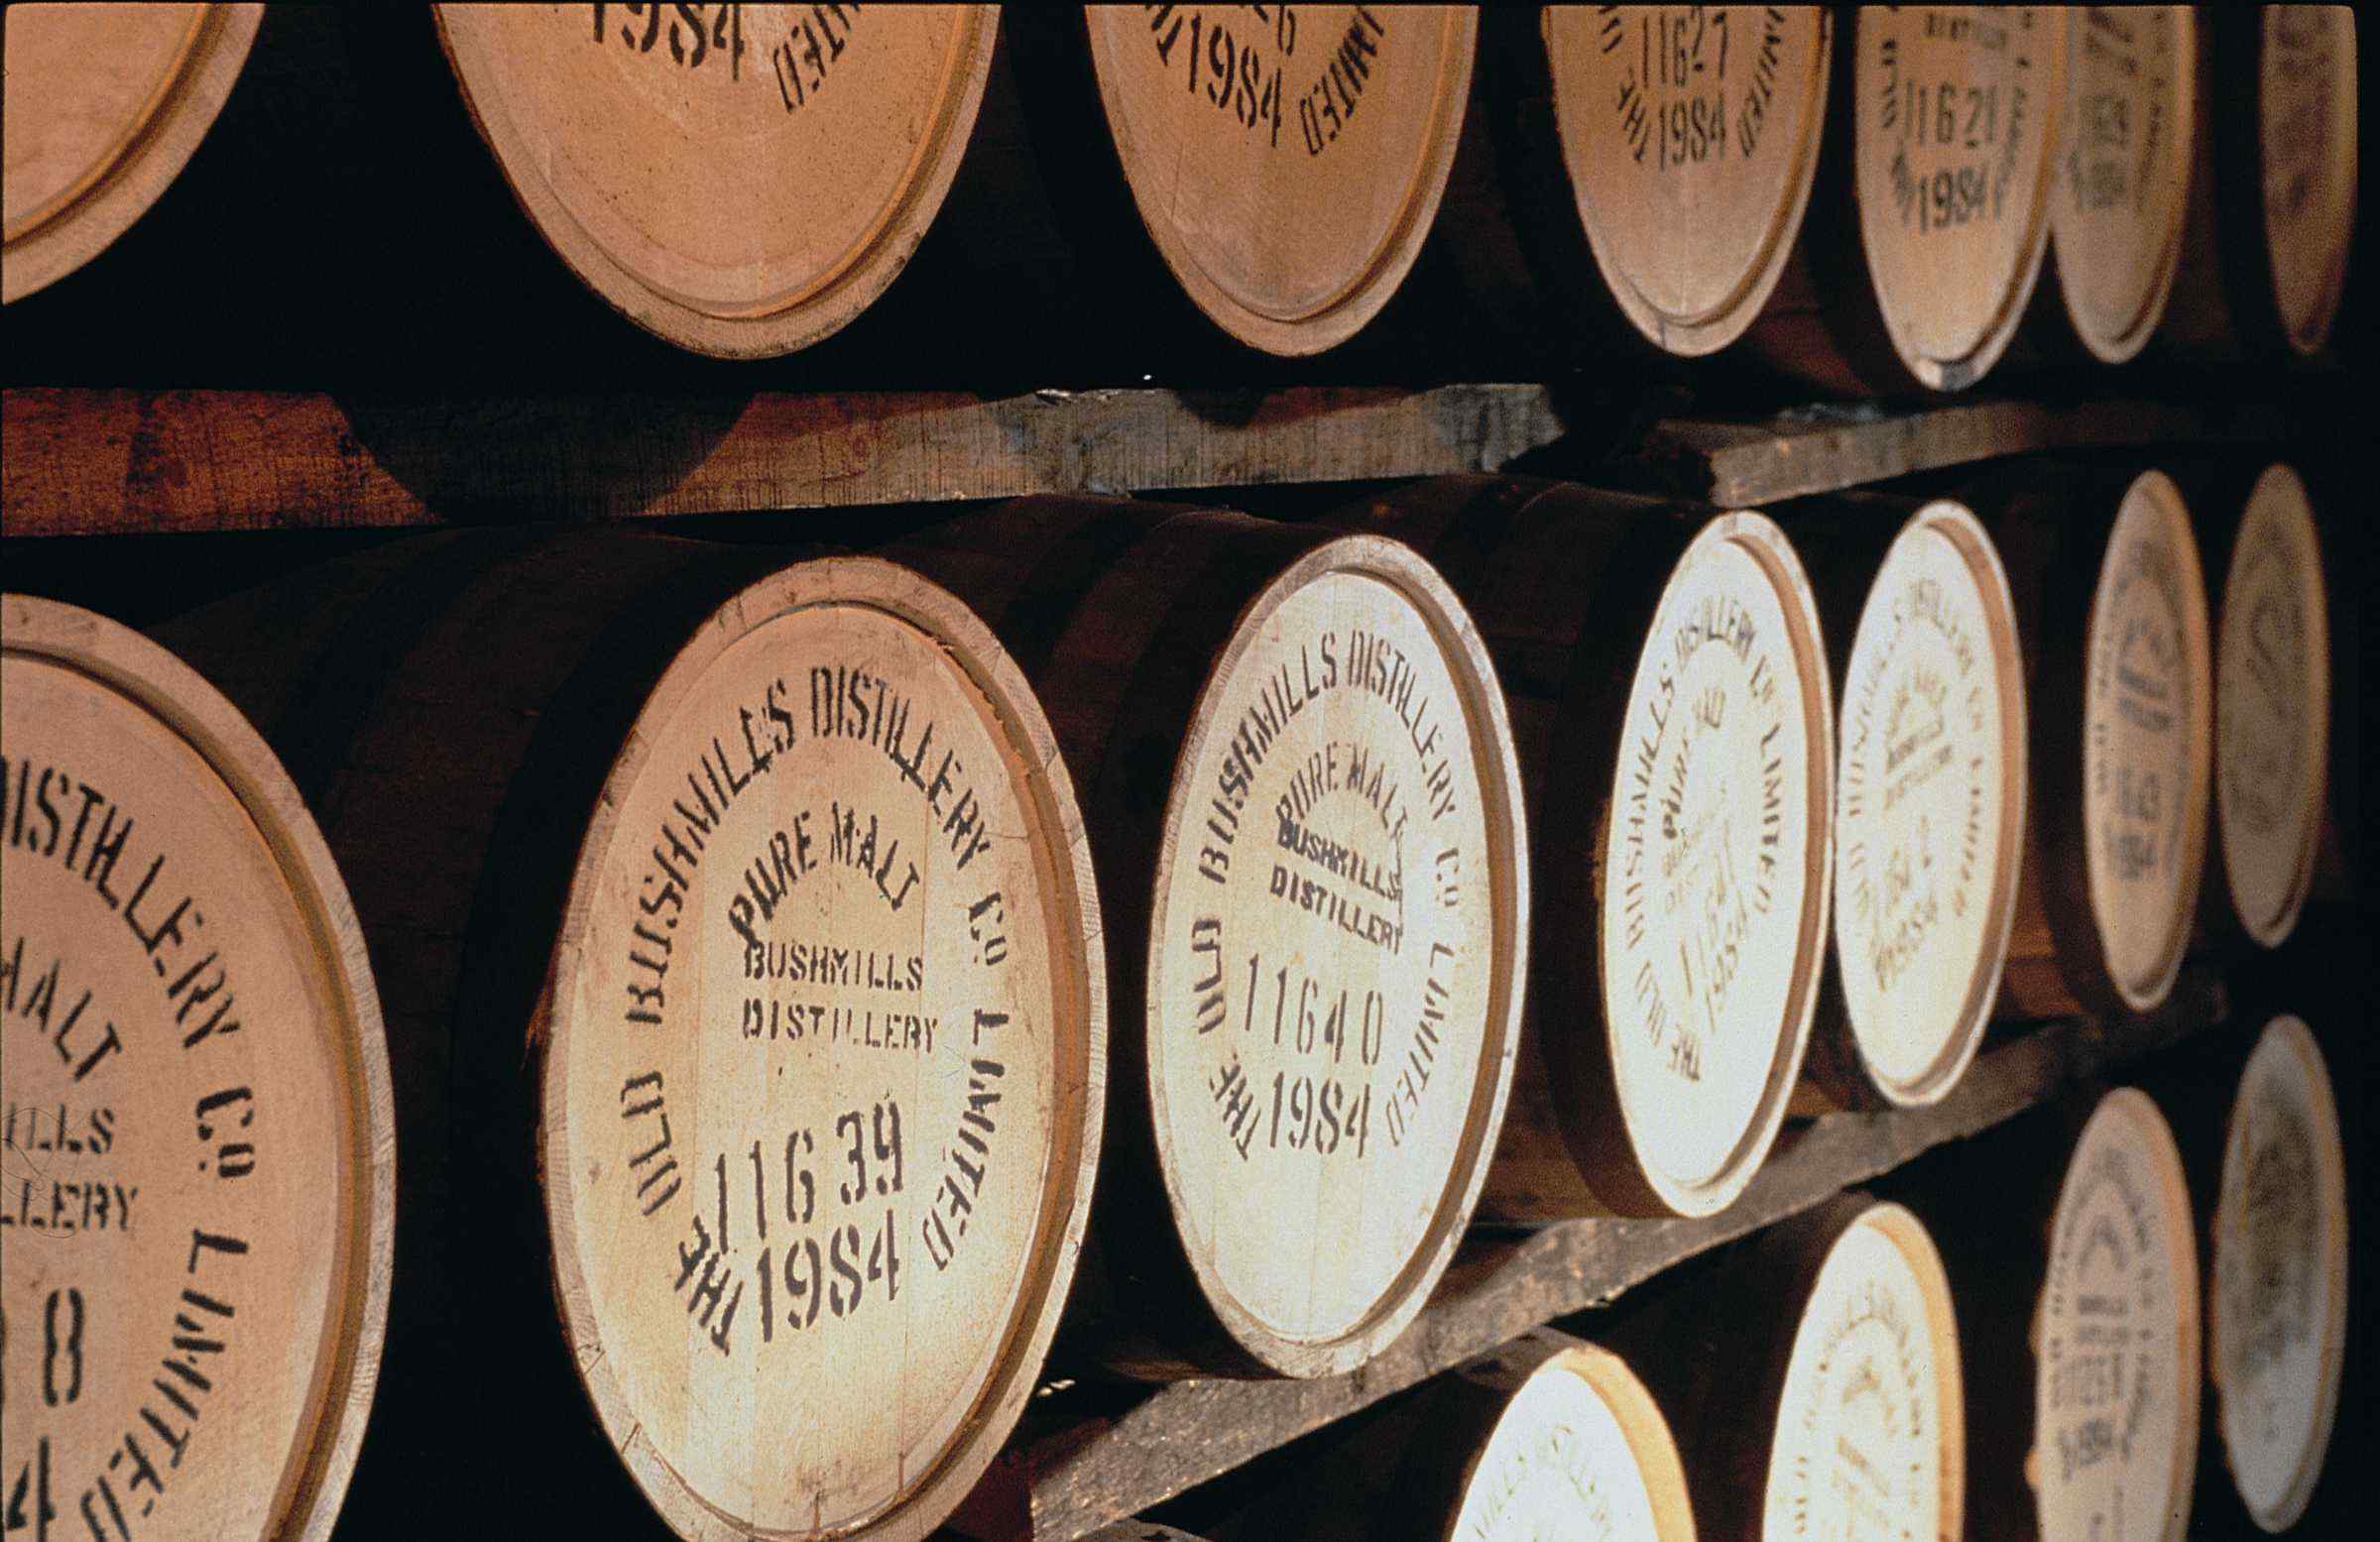 KNOW YOUR WHISKEY THE DIFFERENCE BETWEEN BOURBON SCOTCH RYE IRISH